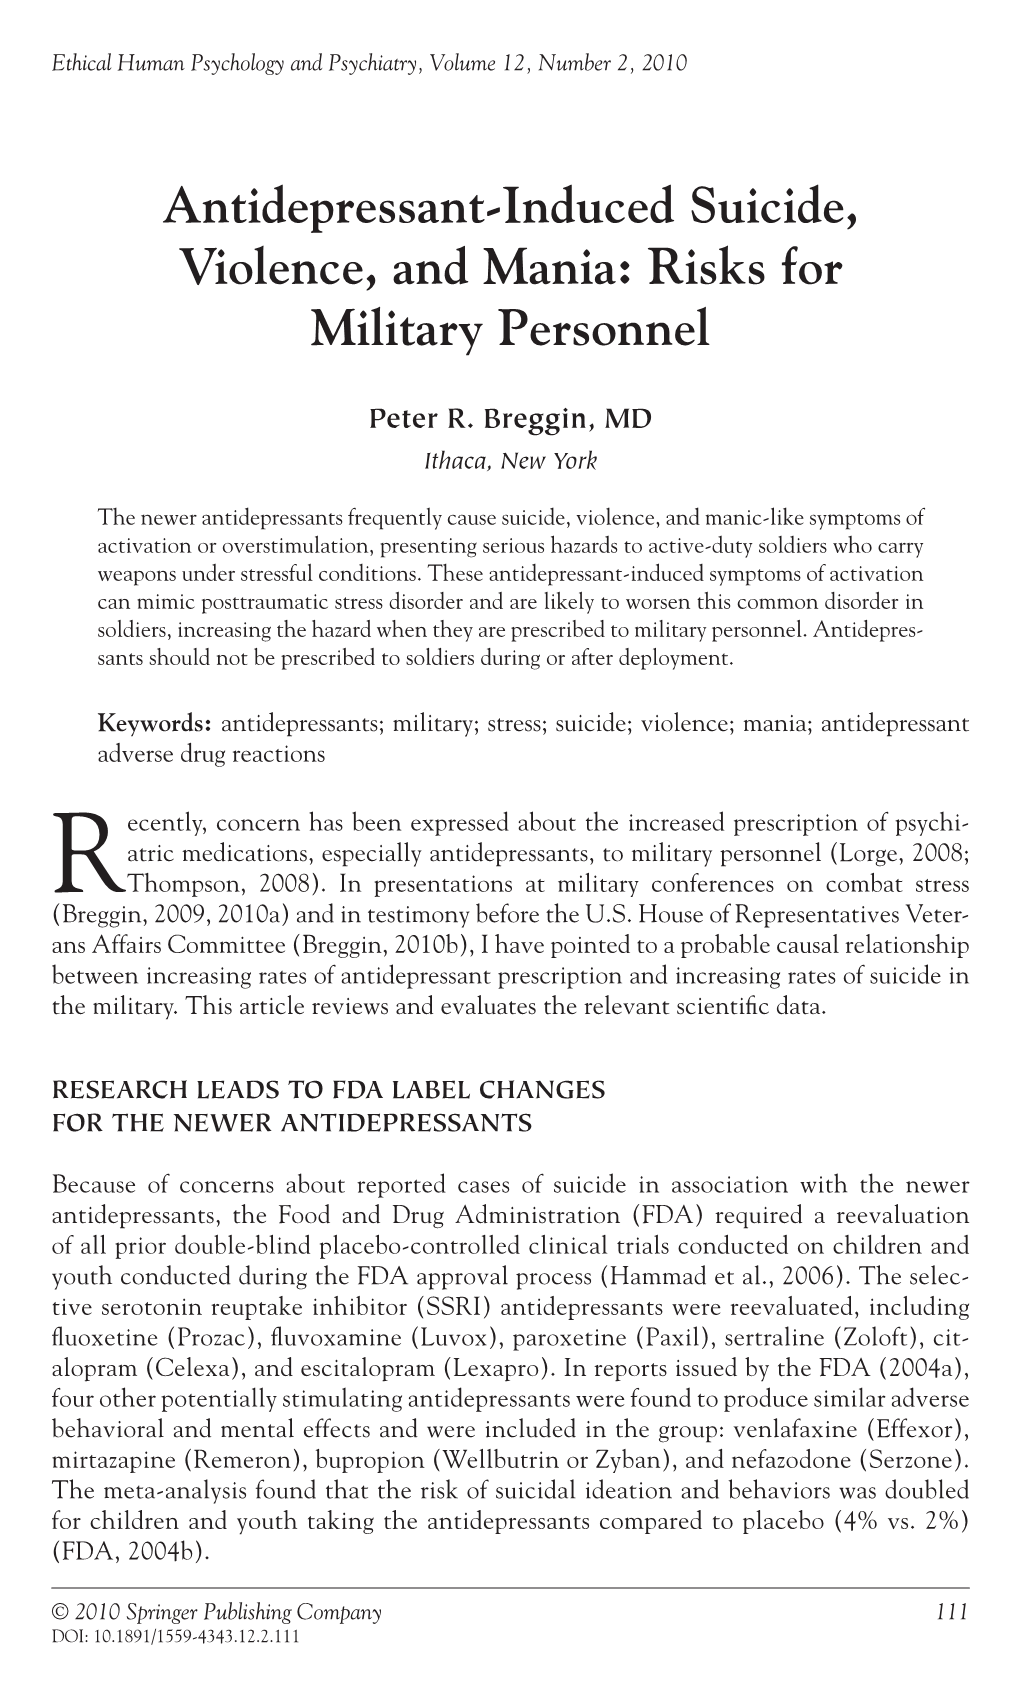 Antidepressant-Induced Suicide, Violence, and Mania: Risks for Military Personnel